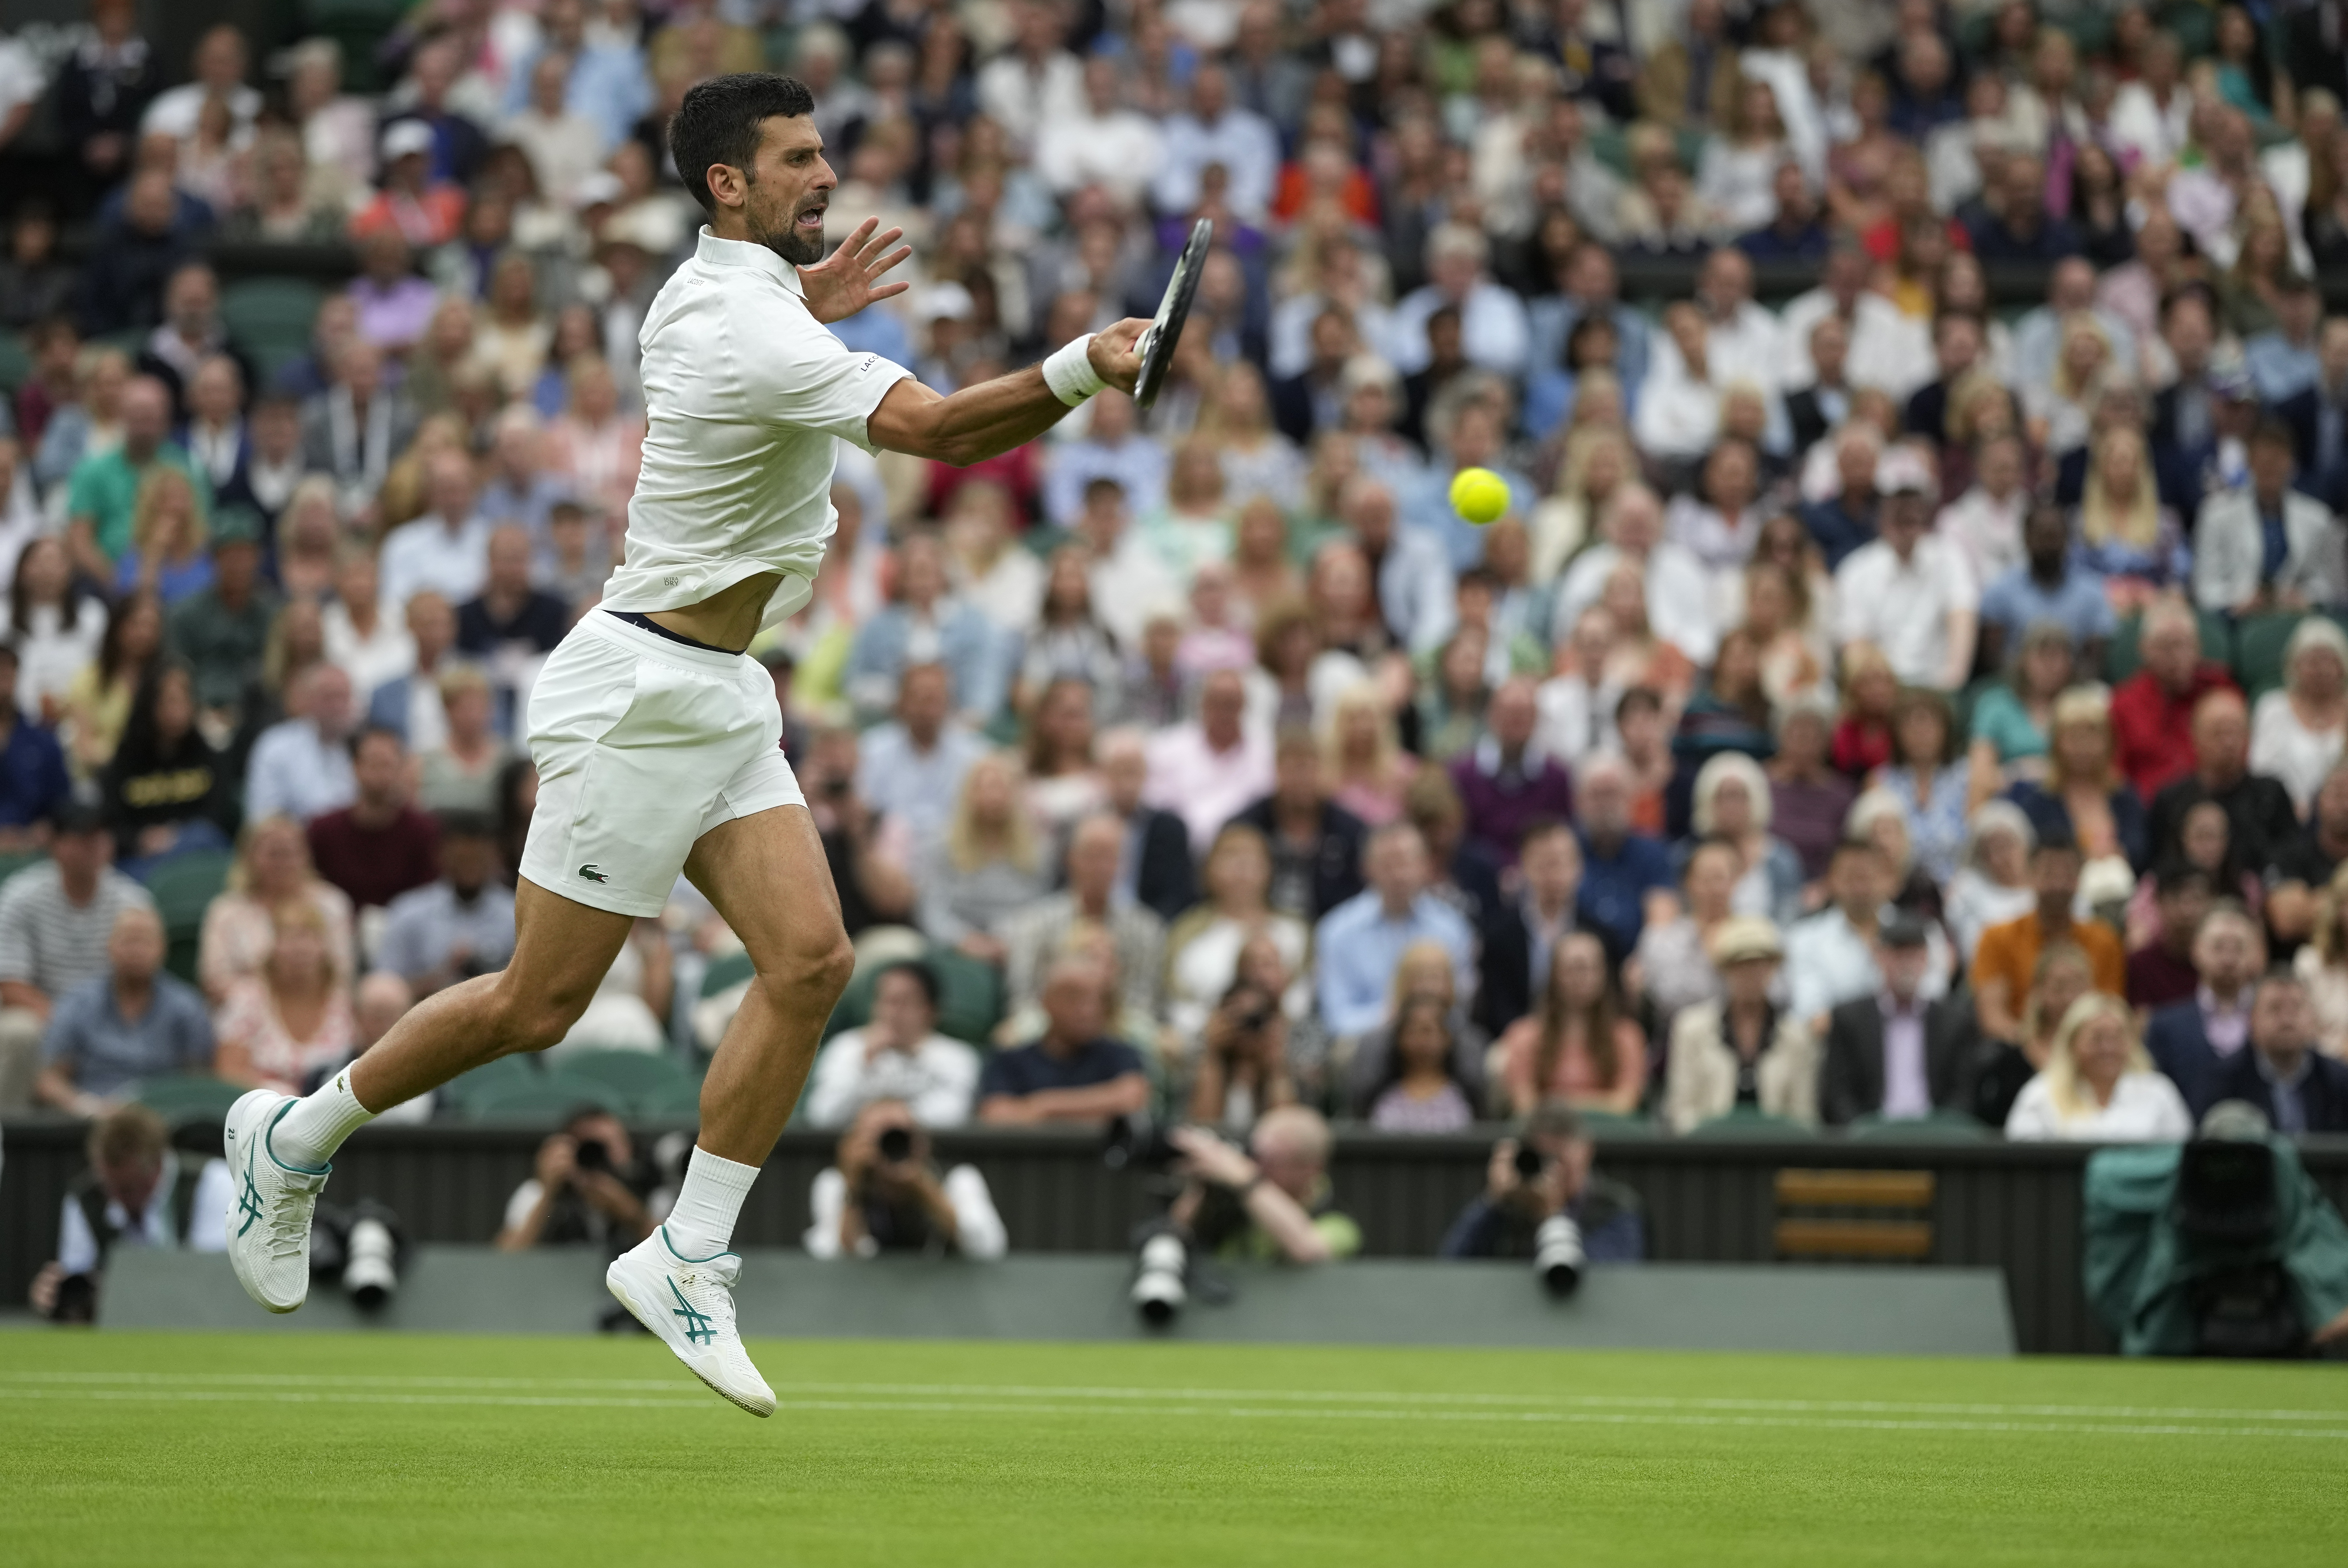 How to watch the mens singles final at Wimbledon (7/16/2023) Free Live Stream, time, channel